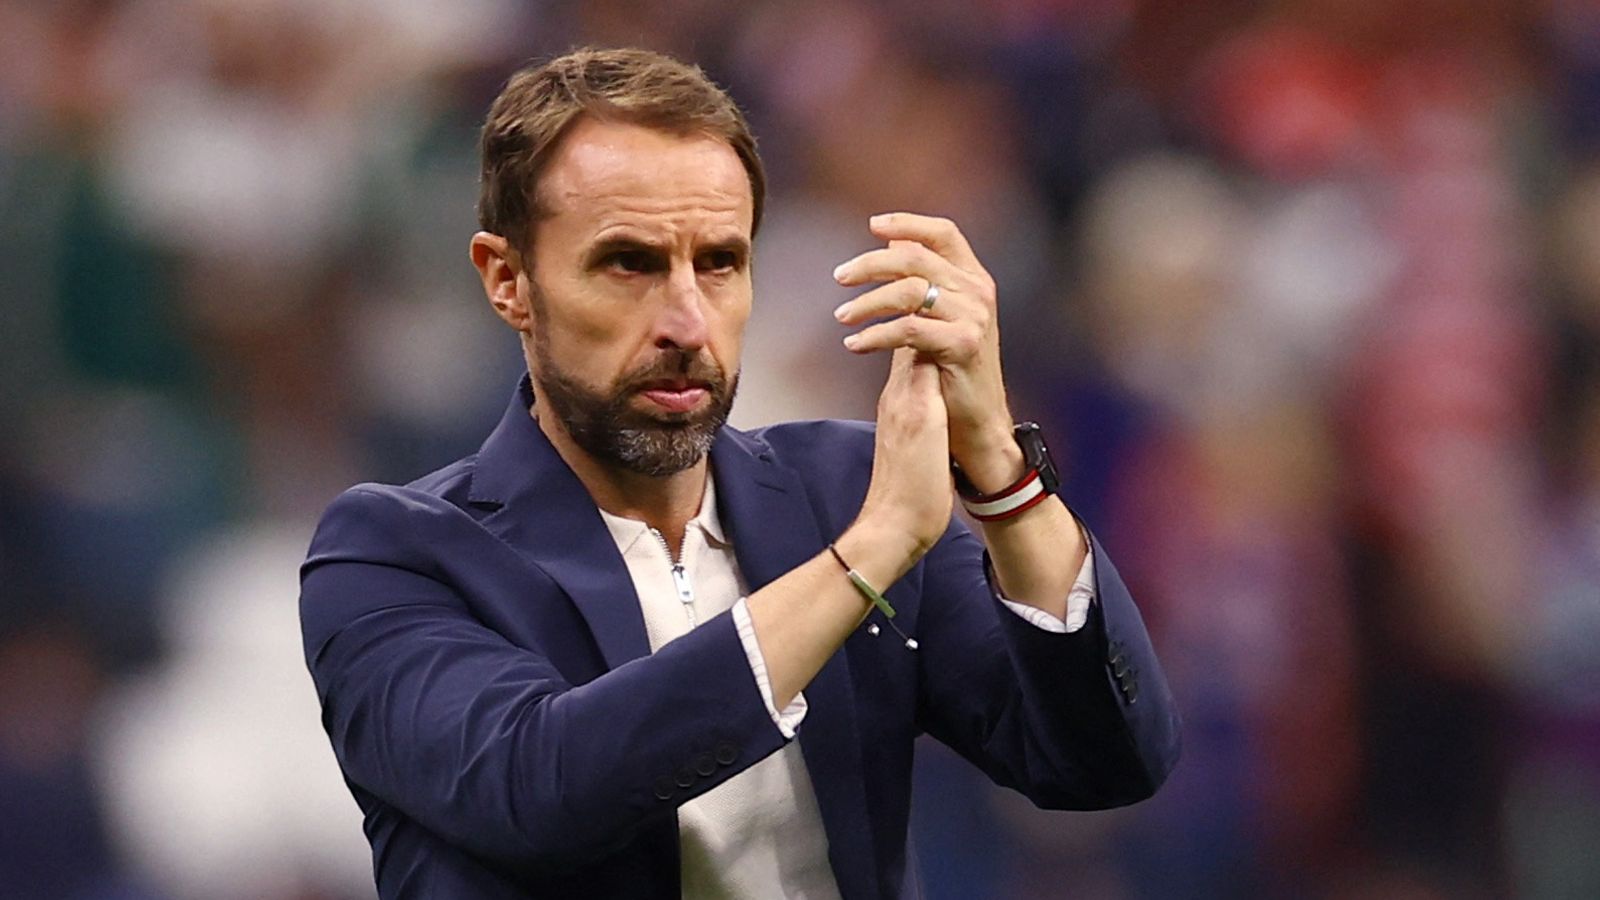 World Cup: Gareth Southgate leaves himself exposed as England's dire display reopens old wounds